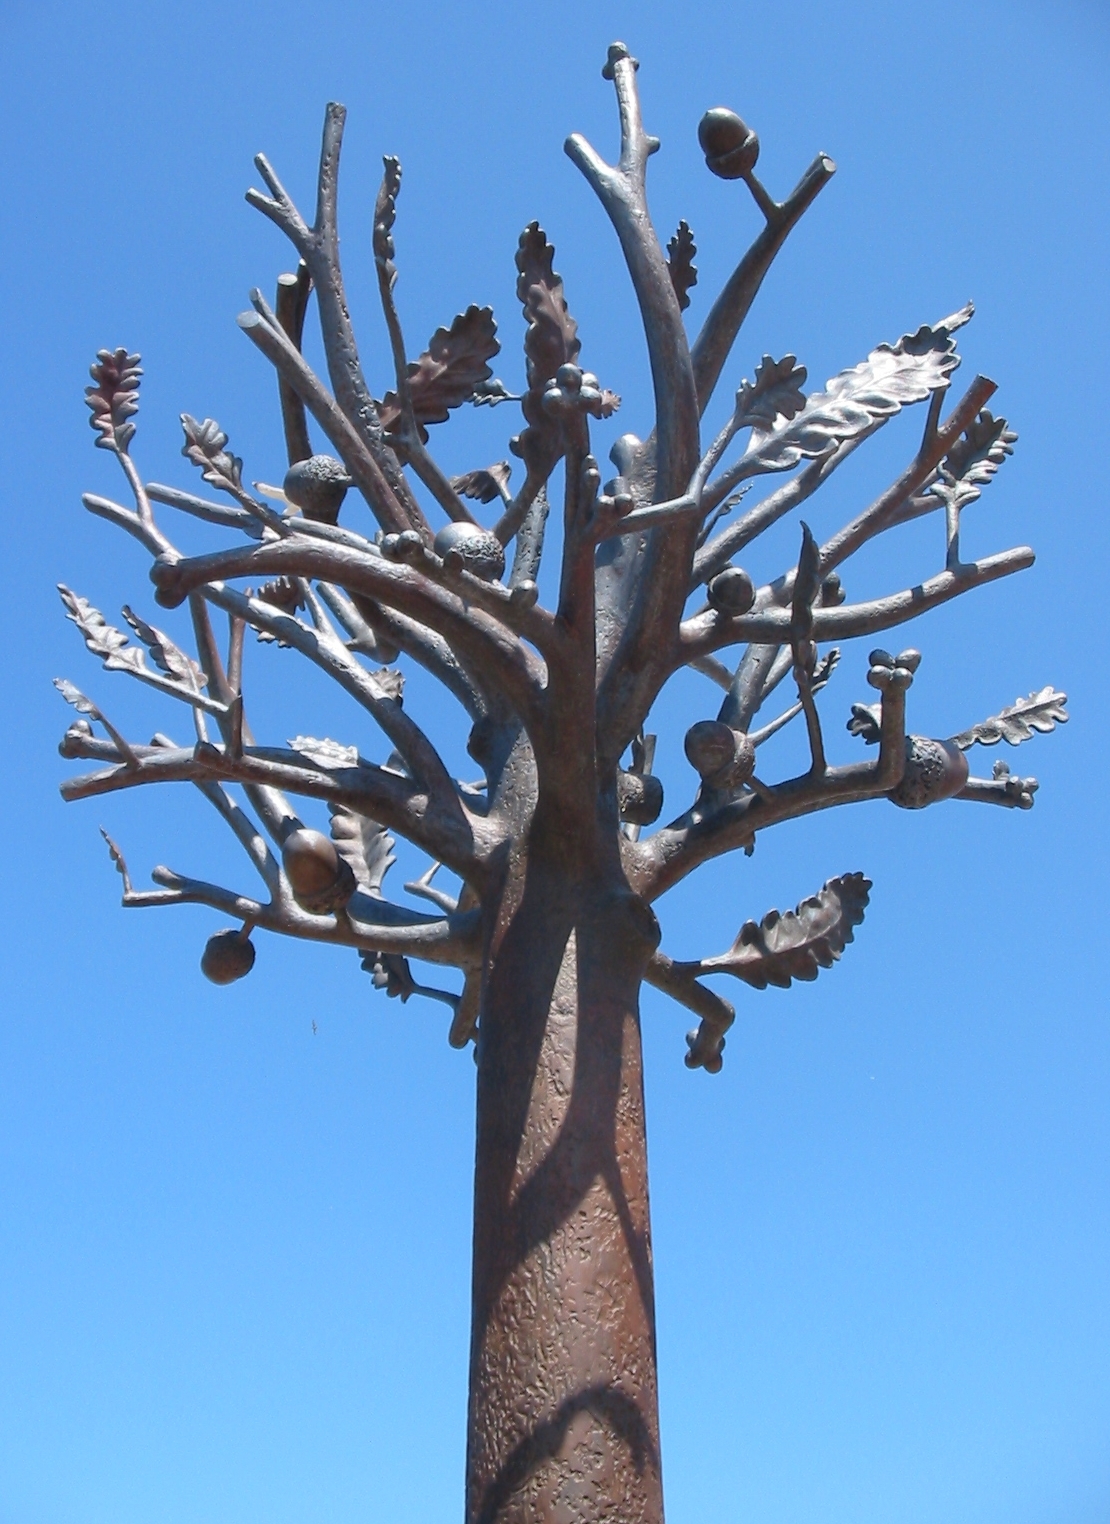 Freedom_Tree_sculpture_St_Helier_Jersey - CREDIT: Man Vyi